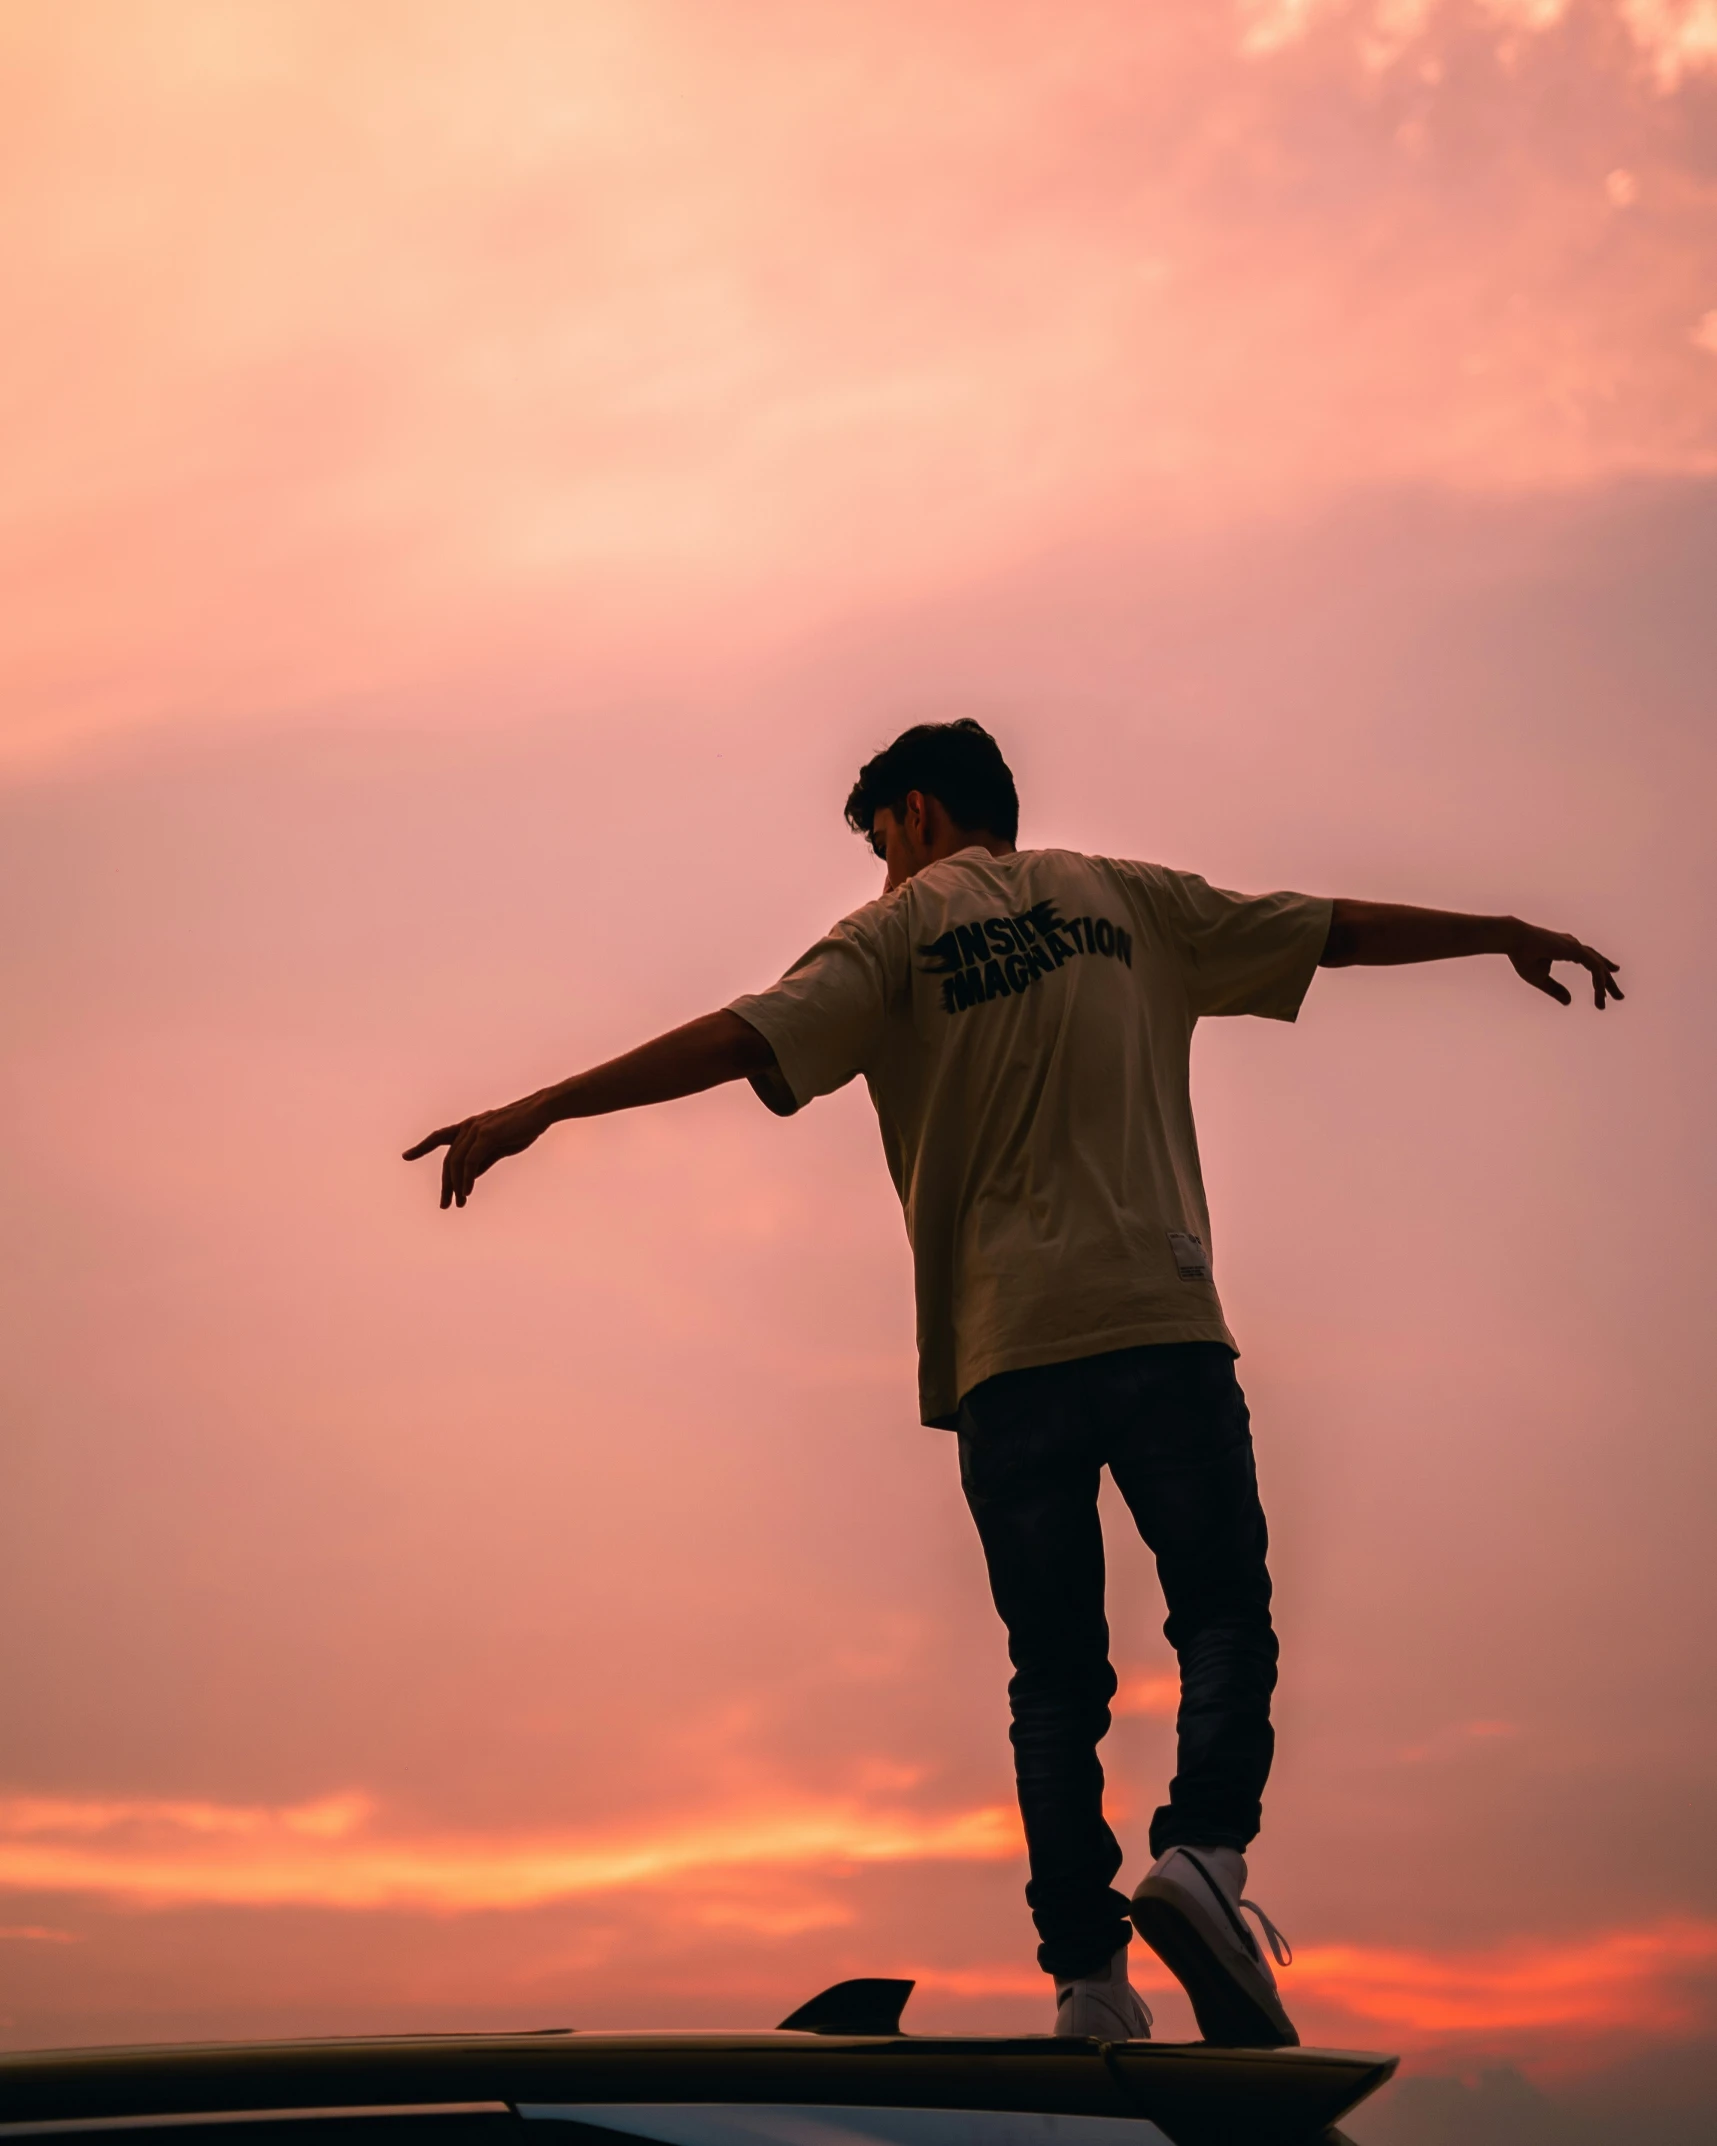 a person riding a skateboard on a ledge at sunset